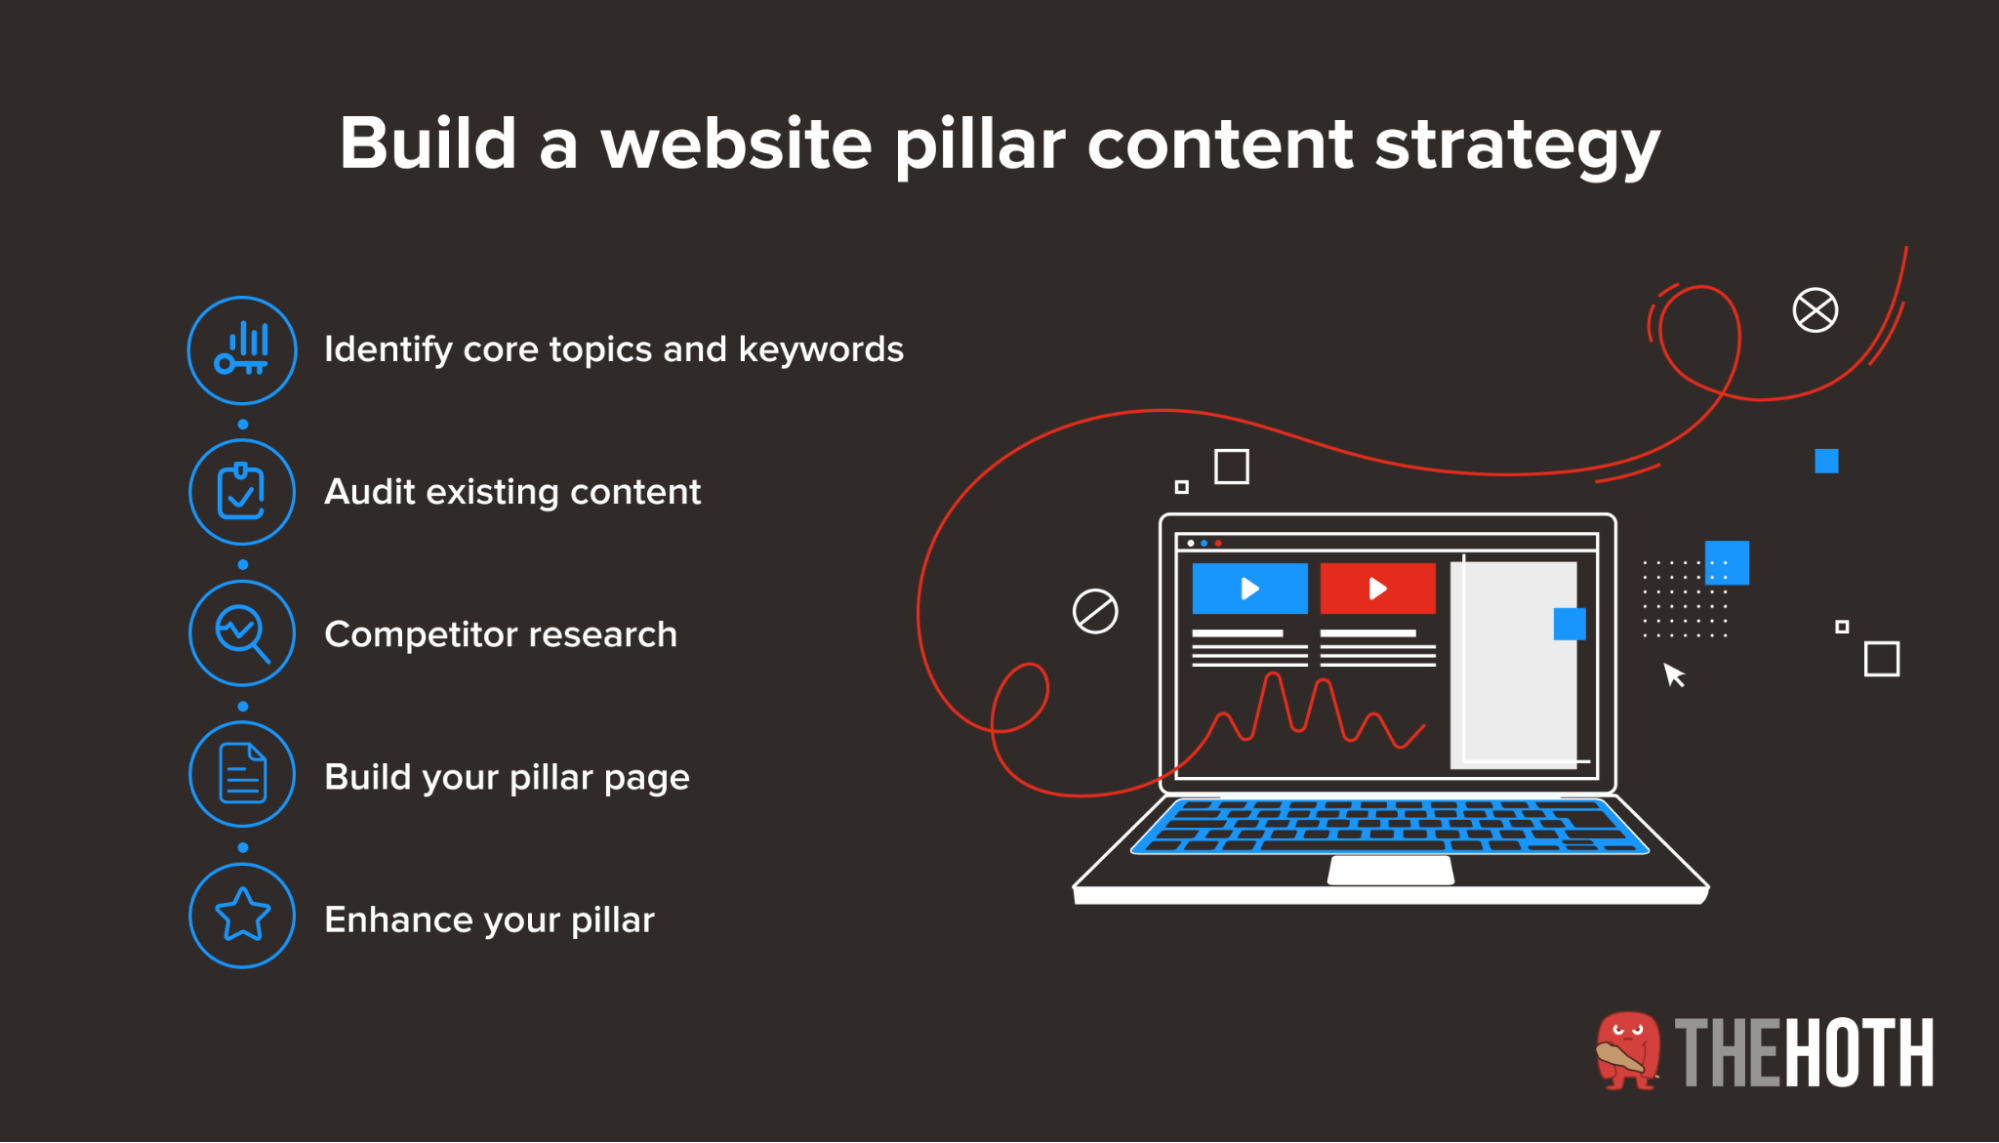 The steps to develop a content pillar strategy for your website